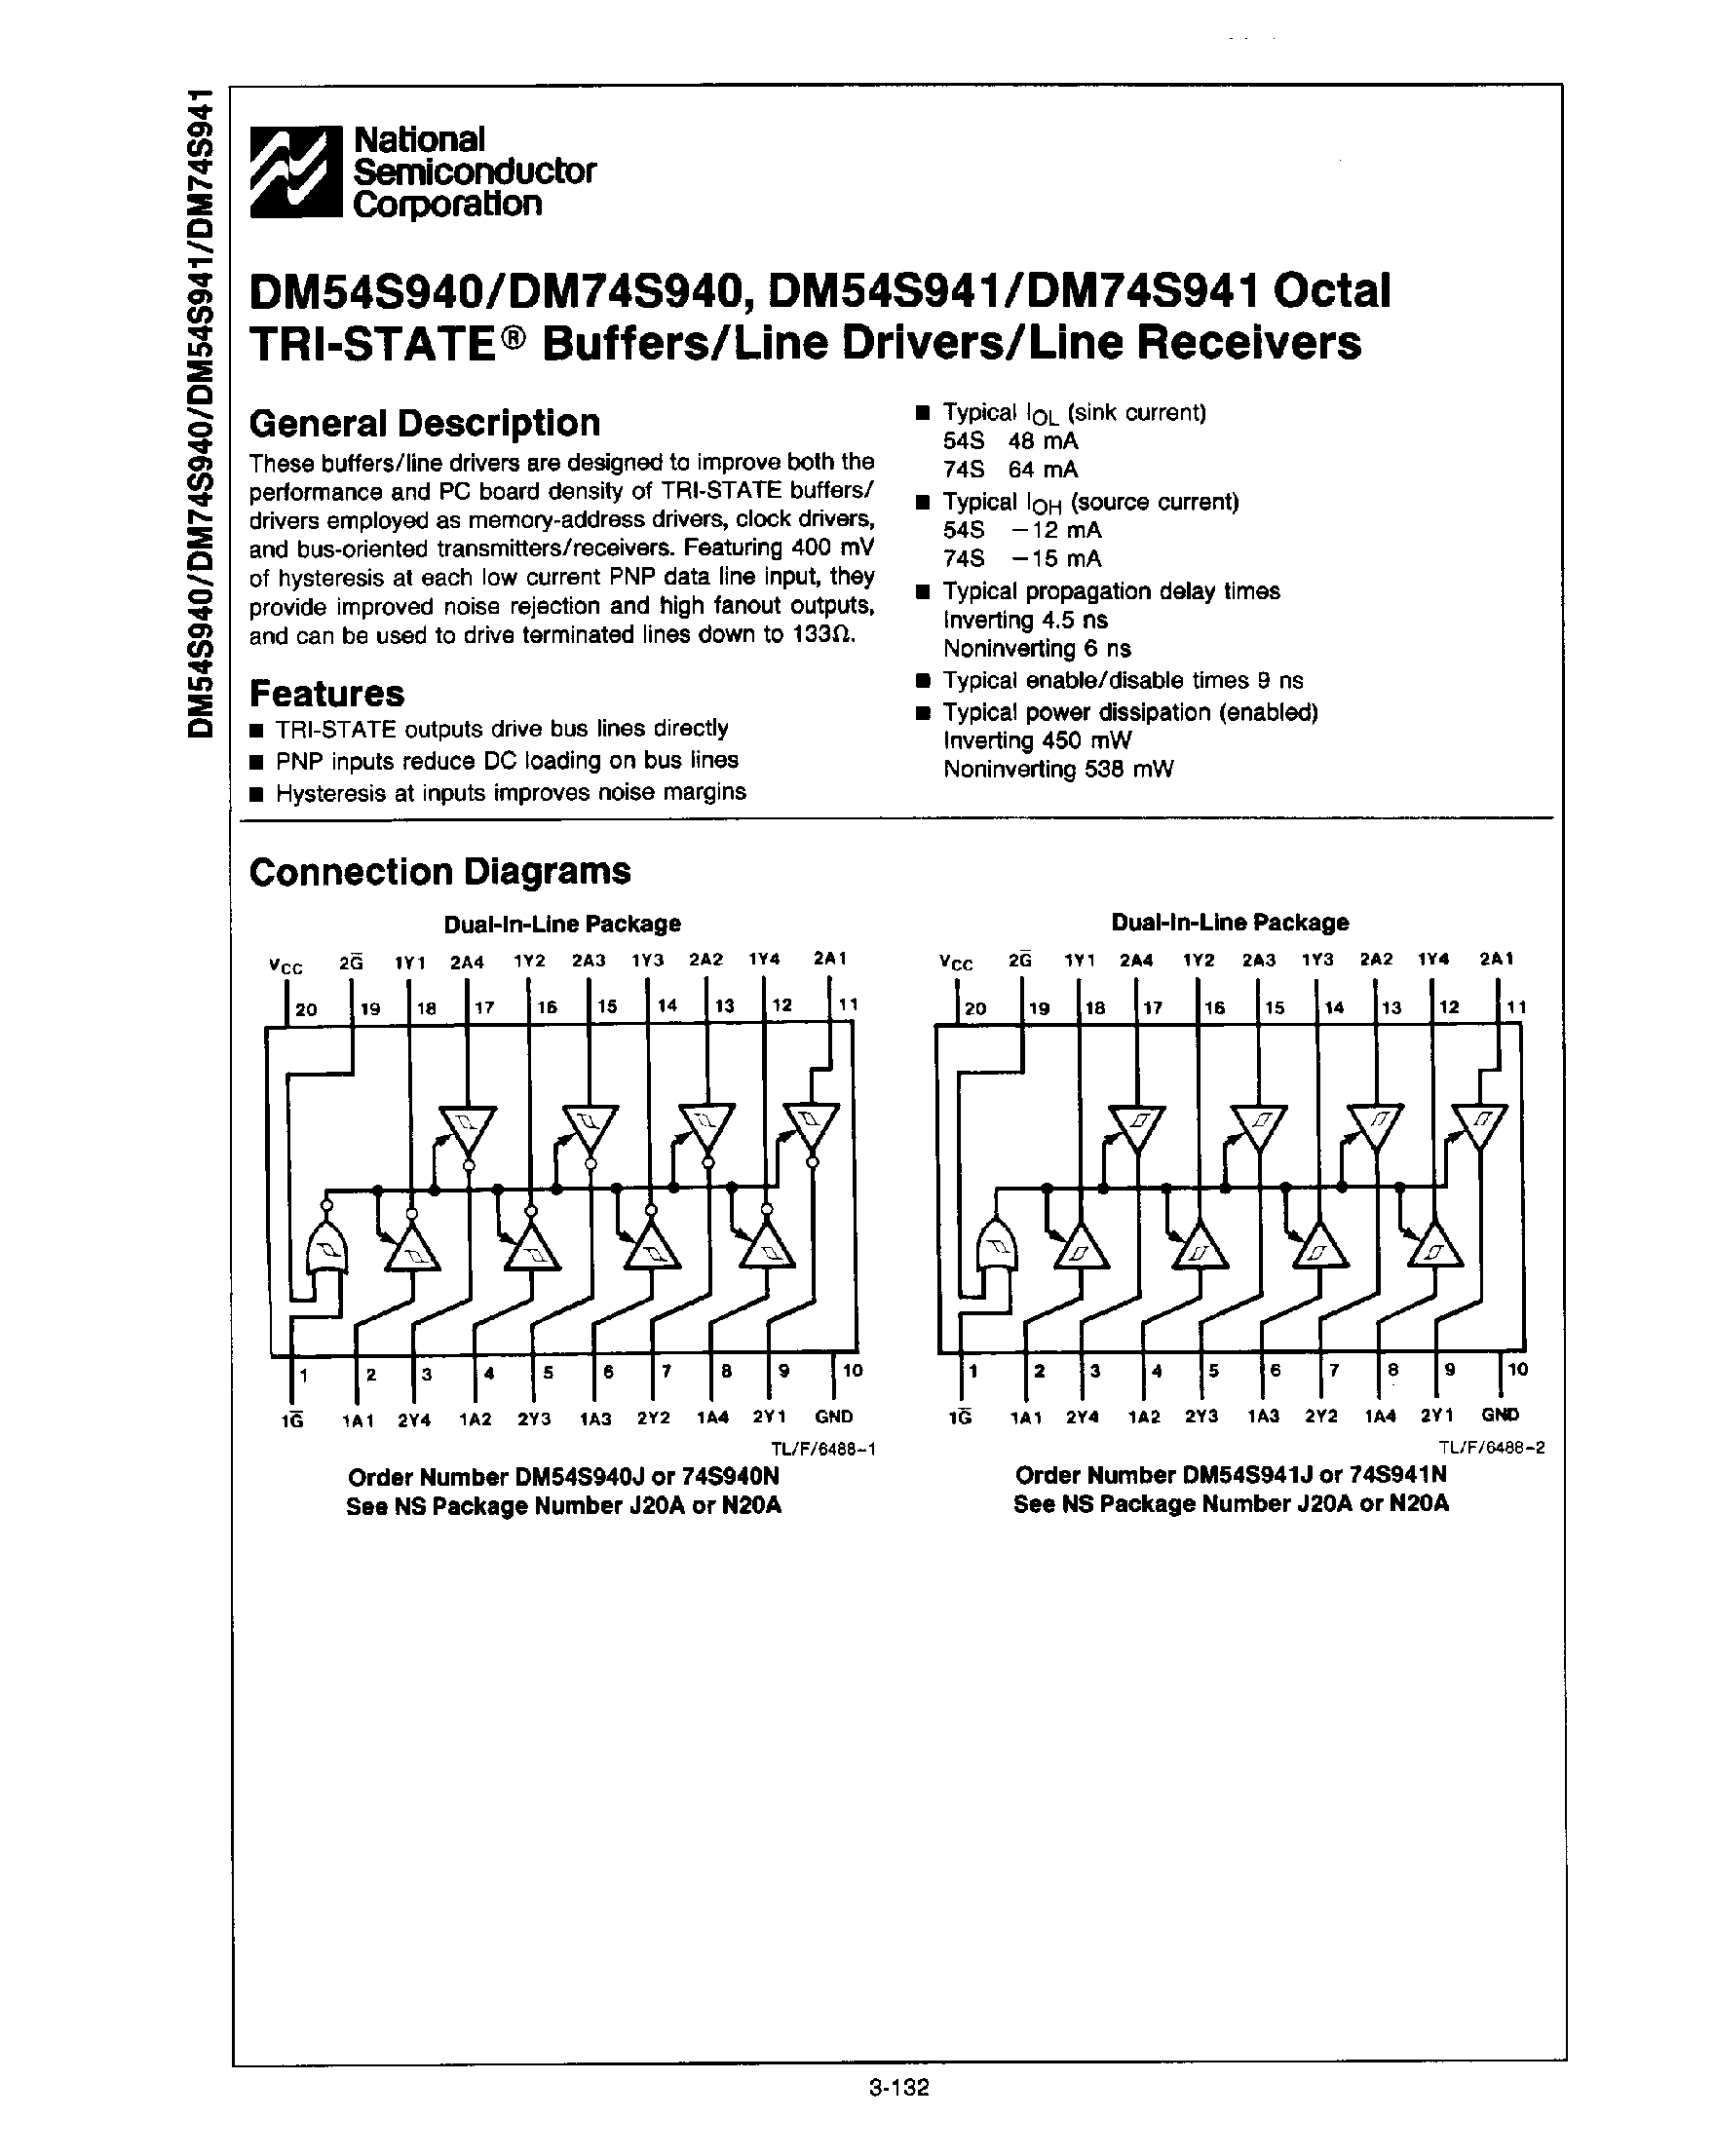 Datasheet DM74S940 - (DM74S940) Octal Tri-State Buffers / Line Drivers / Line Receivers page 1